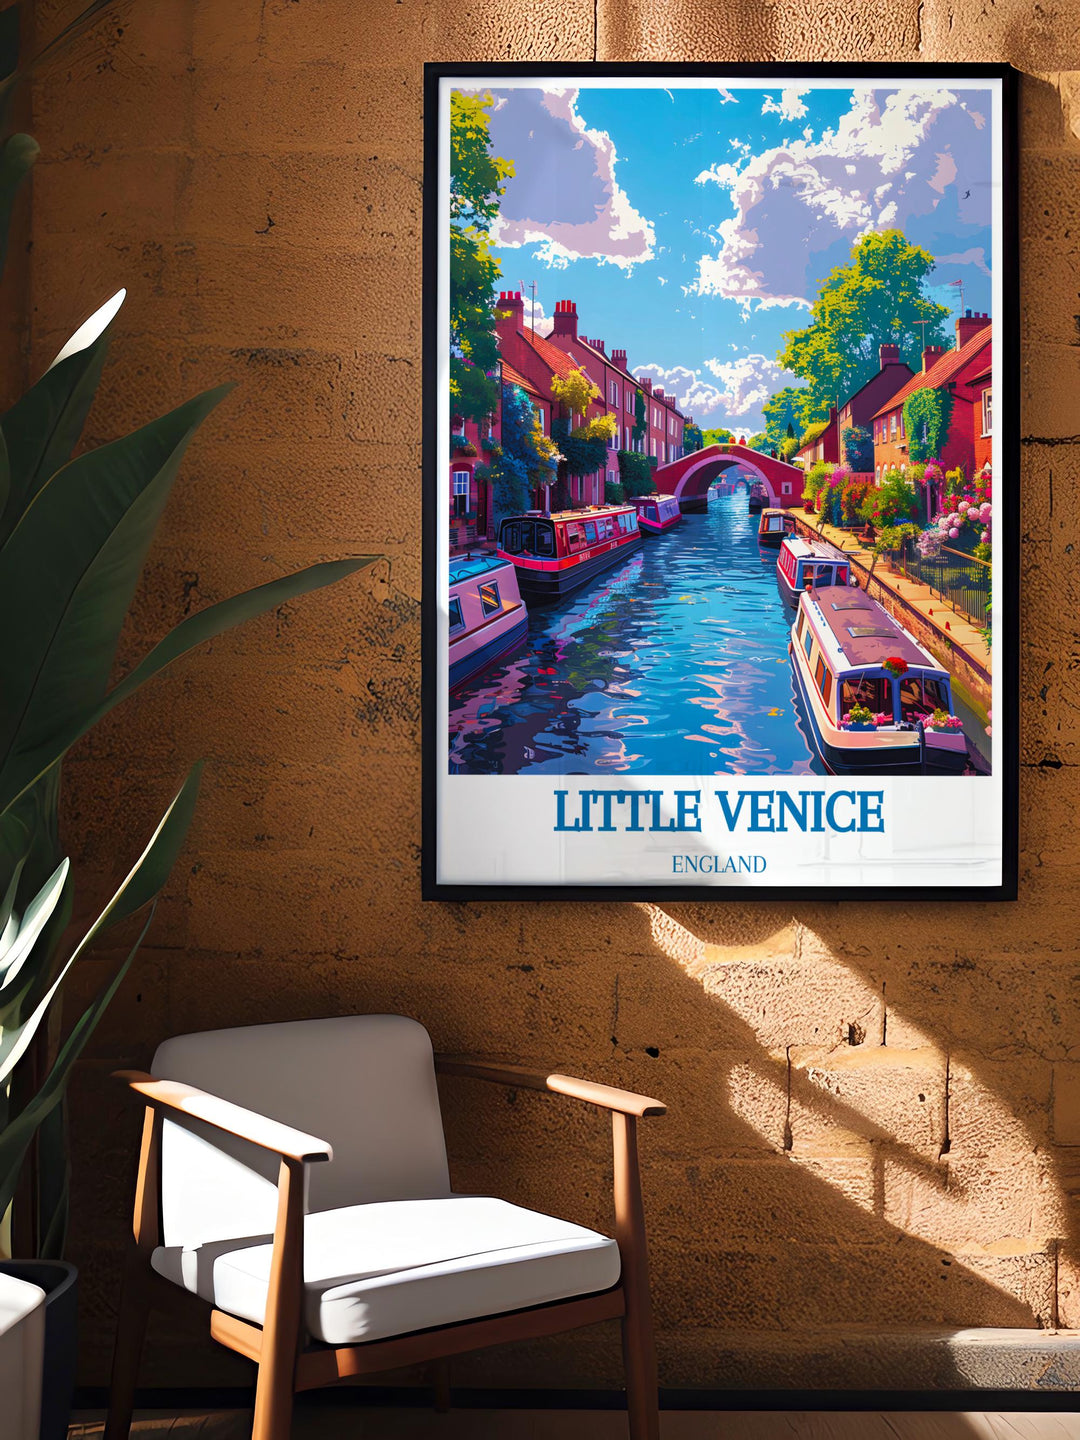 Framed art piece featuring the architecture and boats of Little Venice, suitable for classical and modern interiors.